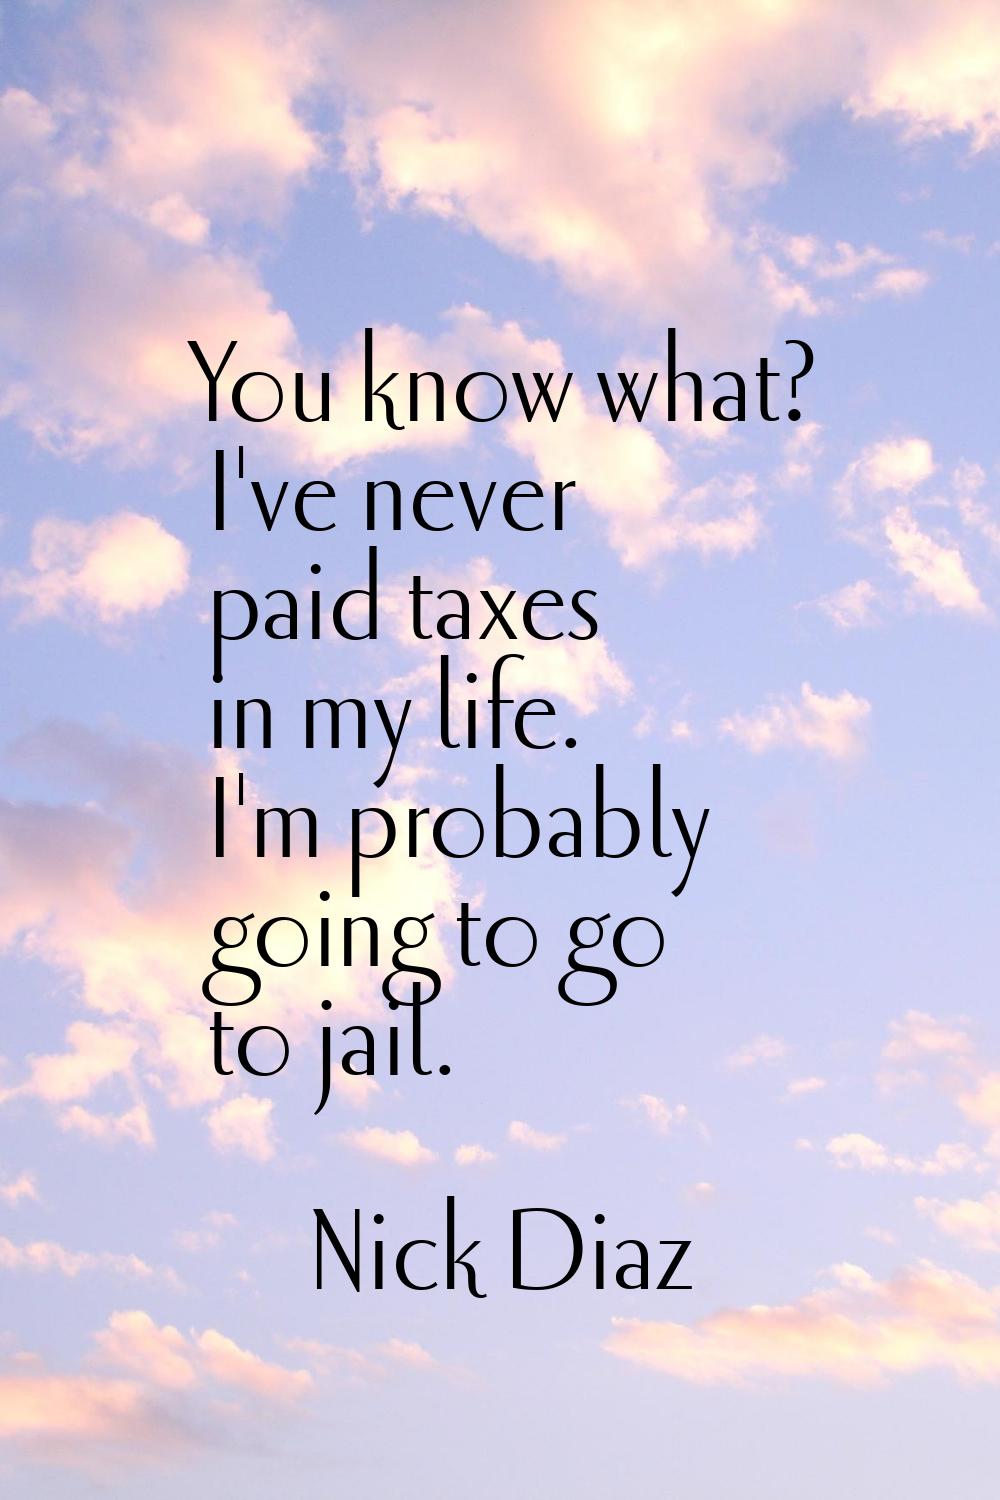 You know what? I've never paid taxes in my life. I'm probably going to go to jail.